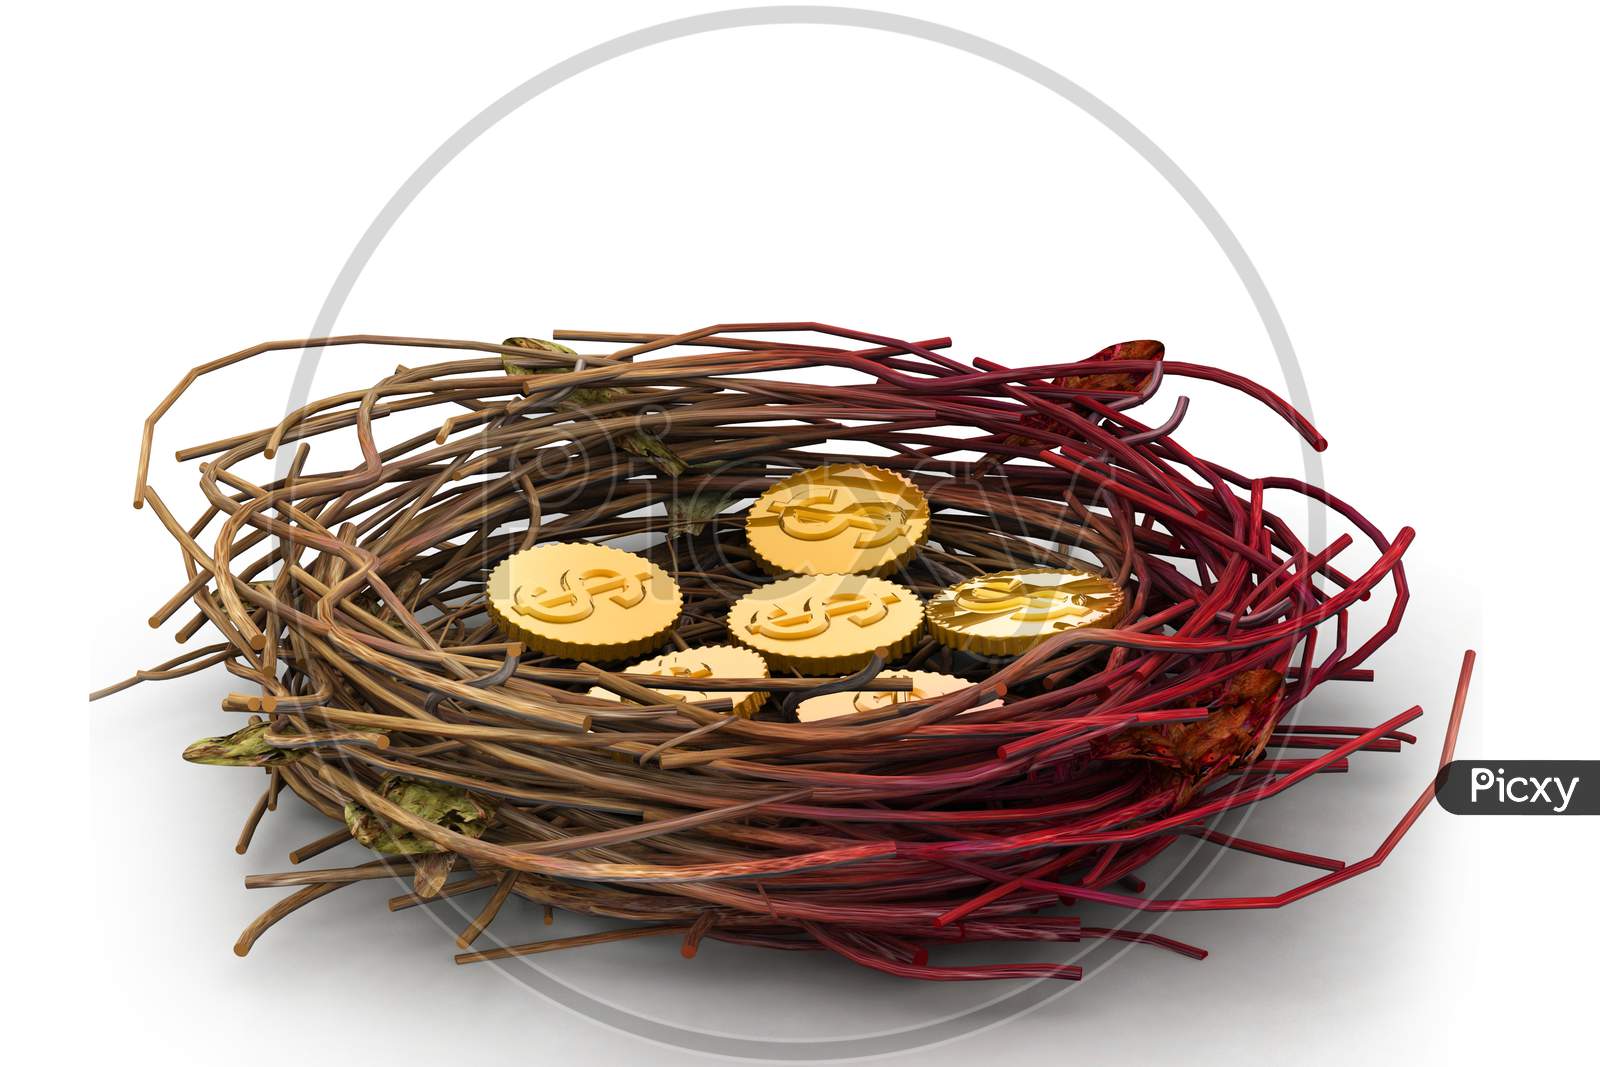 Dollar Coins In Being Protected In A Nest. Conceptual Design